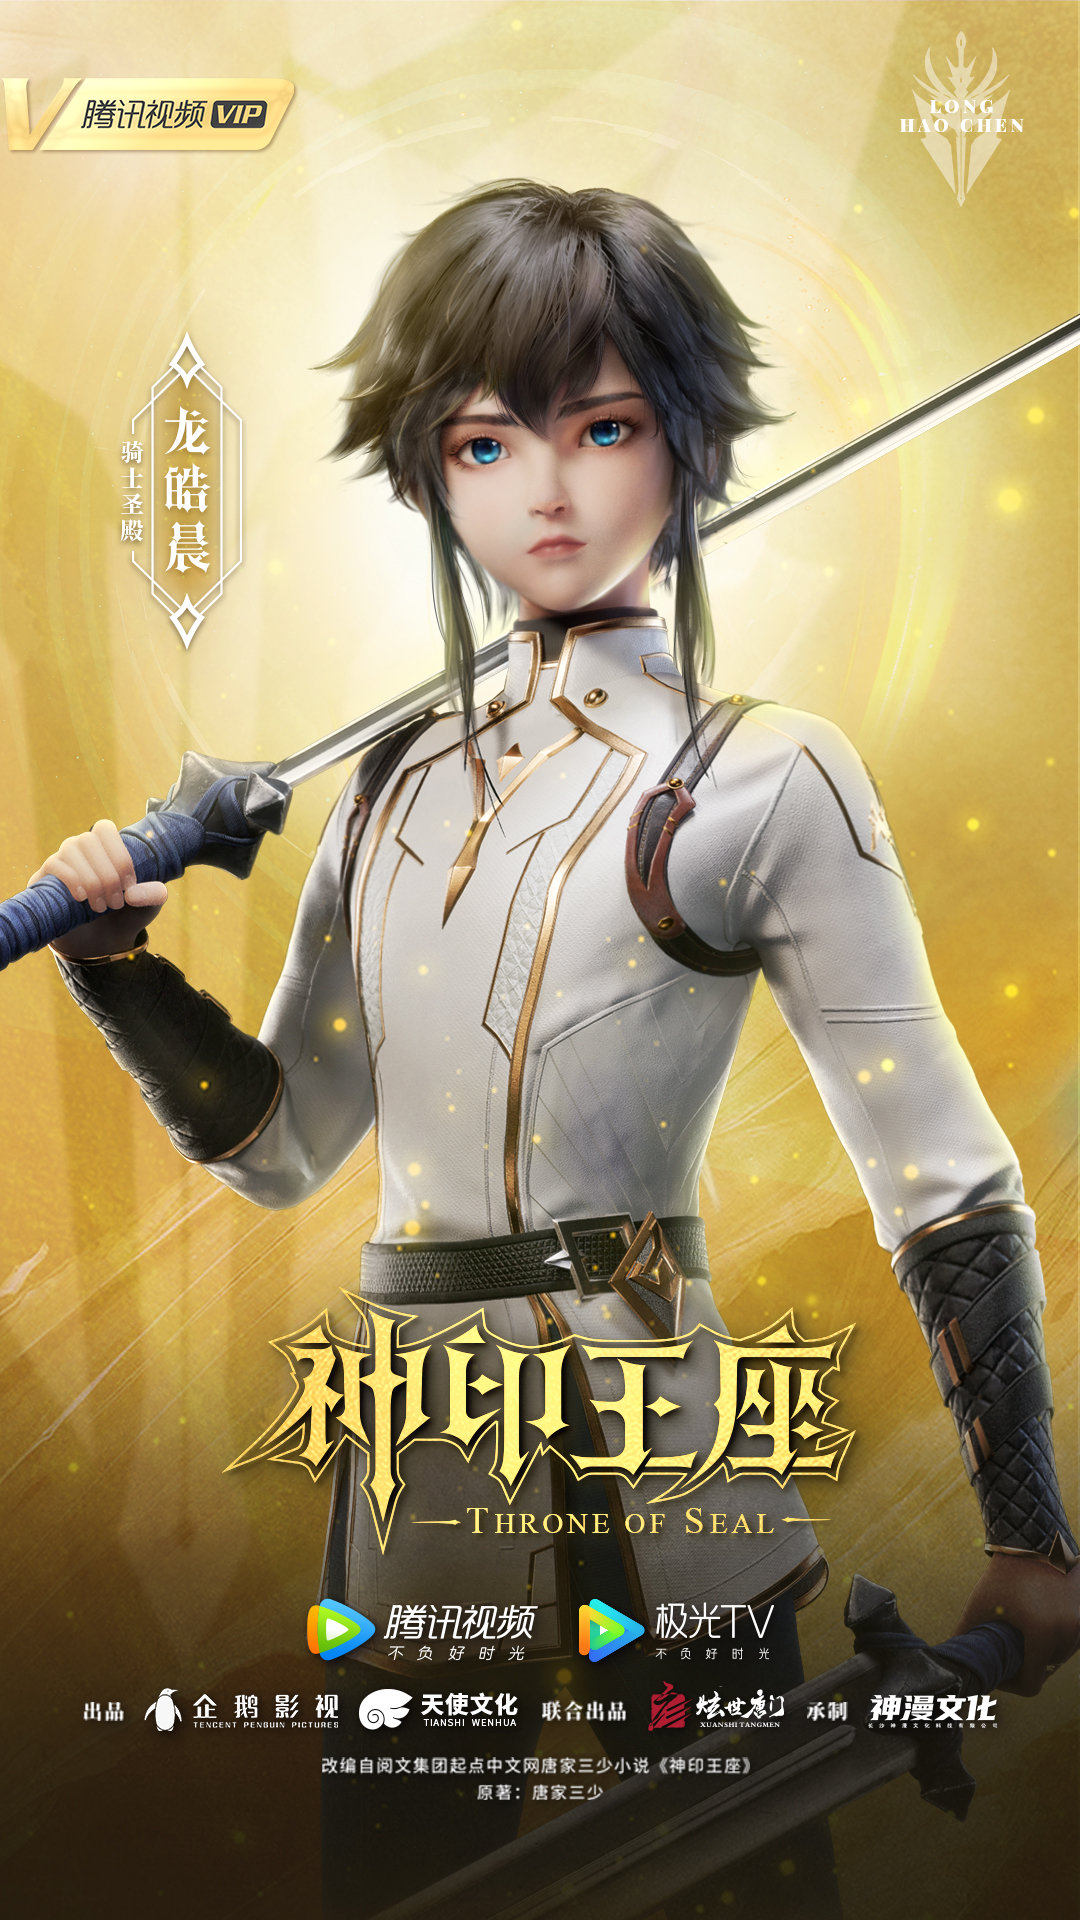 Throne of Seal Character Poster: Long Haochen